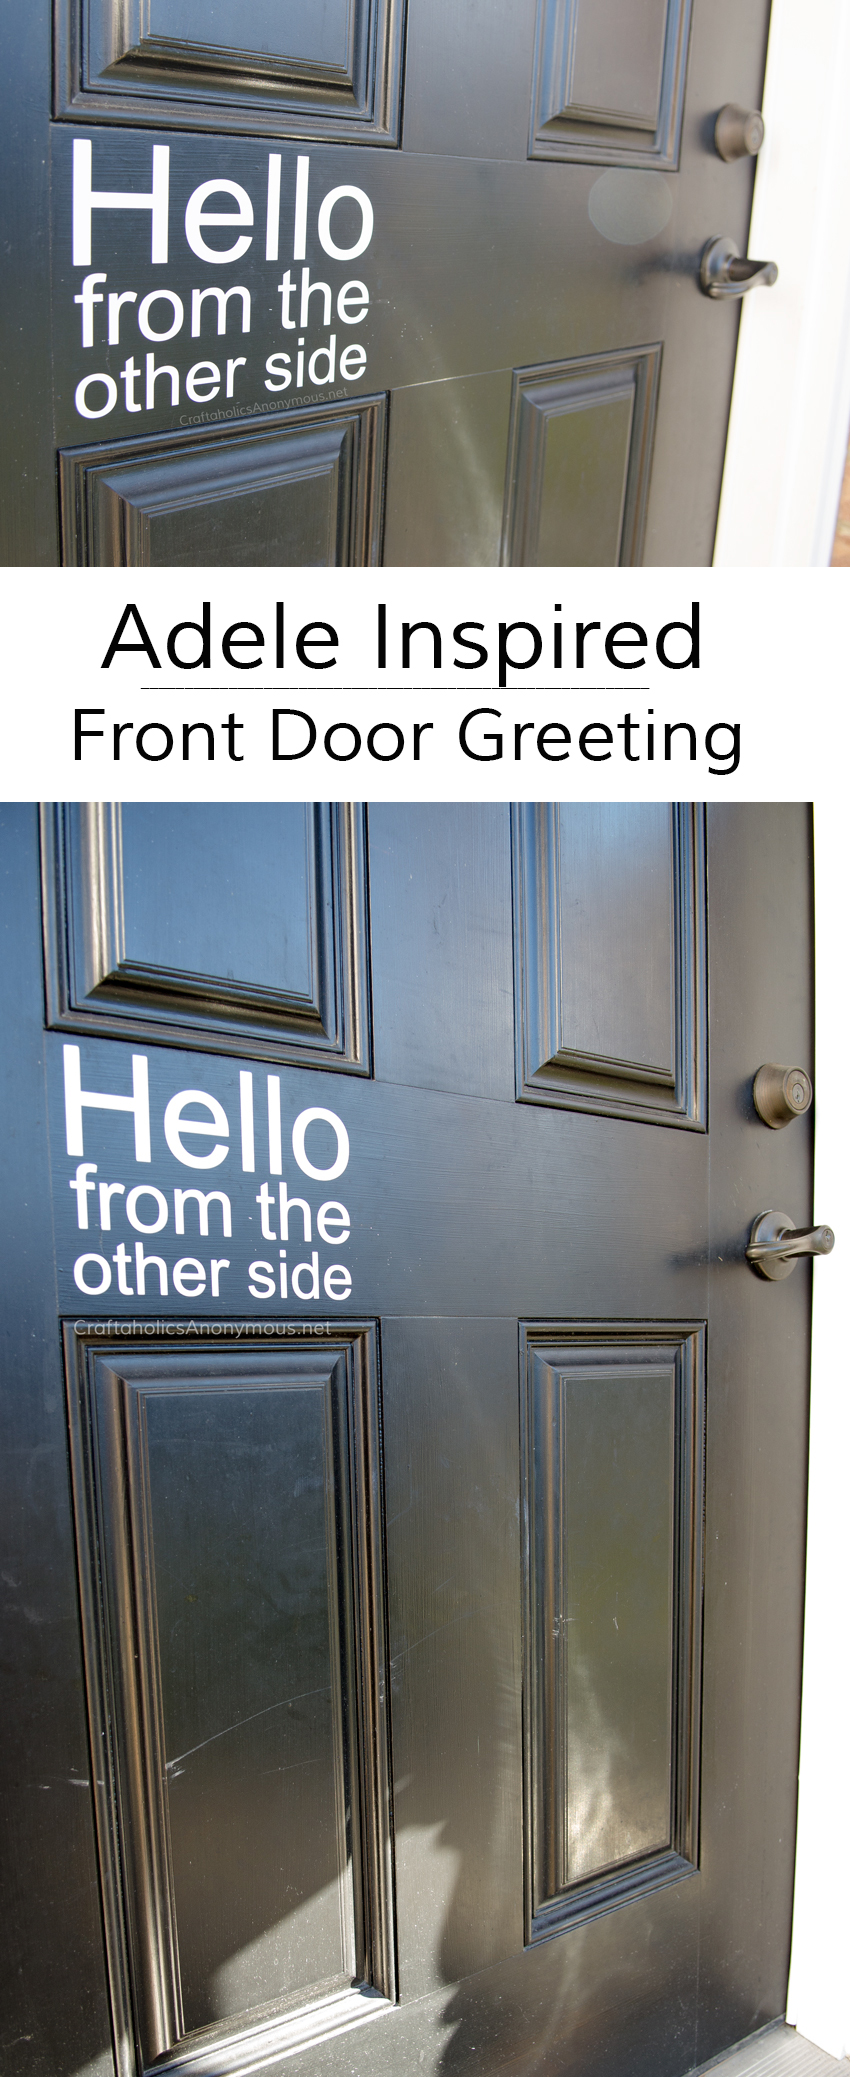 Adele inspired front door greeting.... "Hello from the other side" This is so PERFECT!